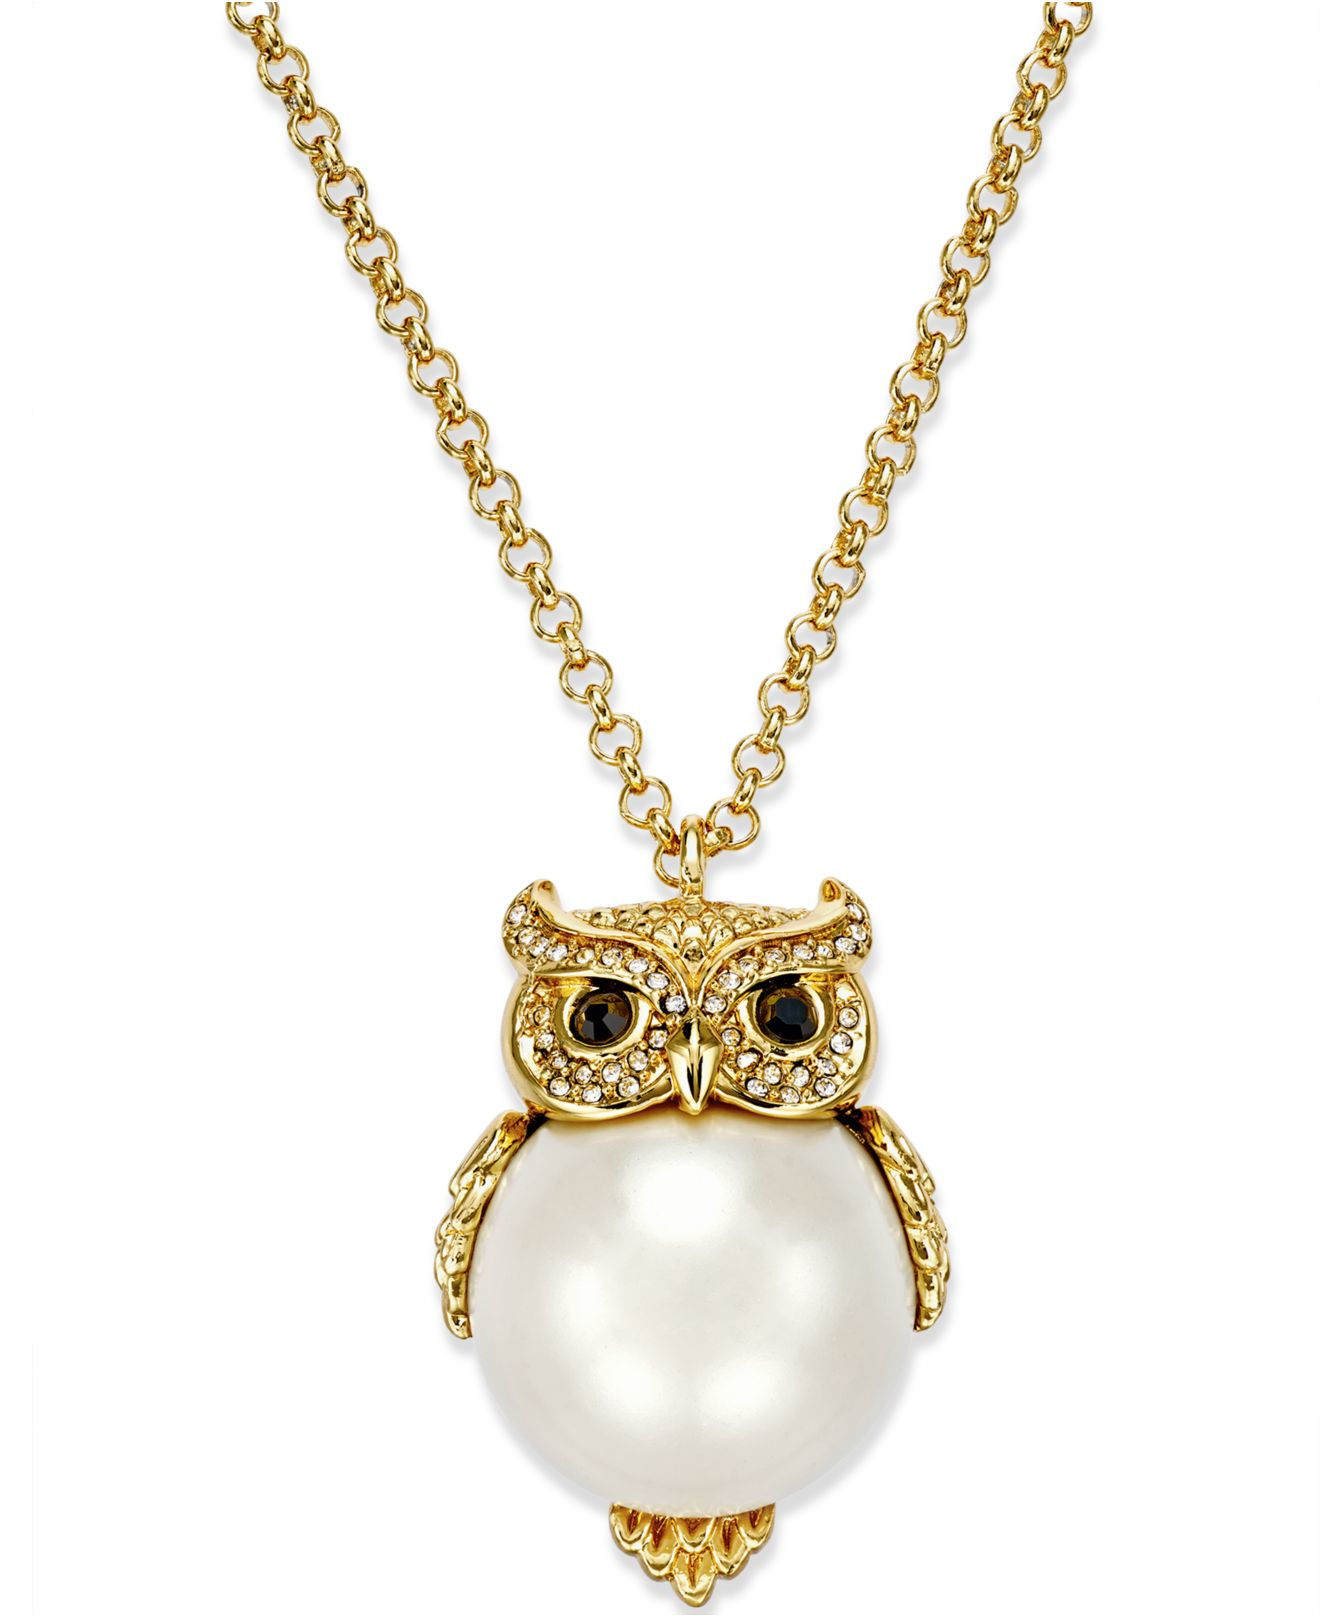 Lyst - Kate spade new york Gold-plated Imitation Pearl Owl ...